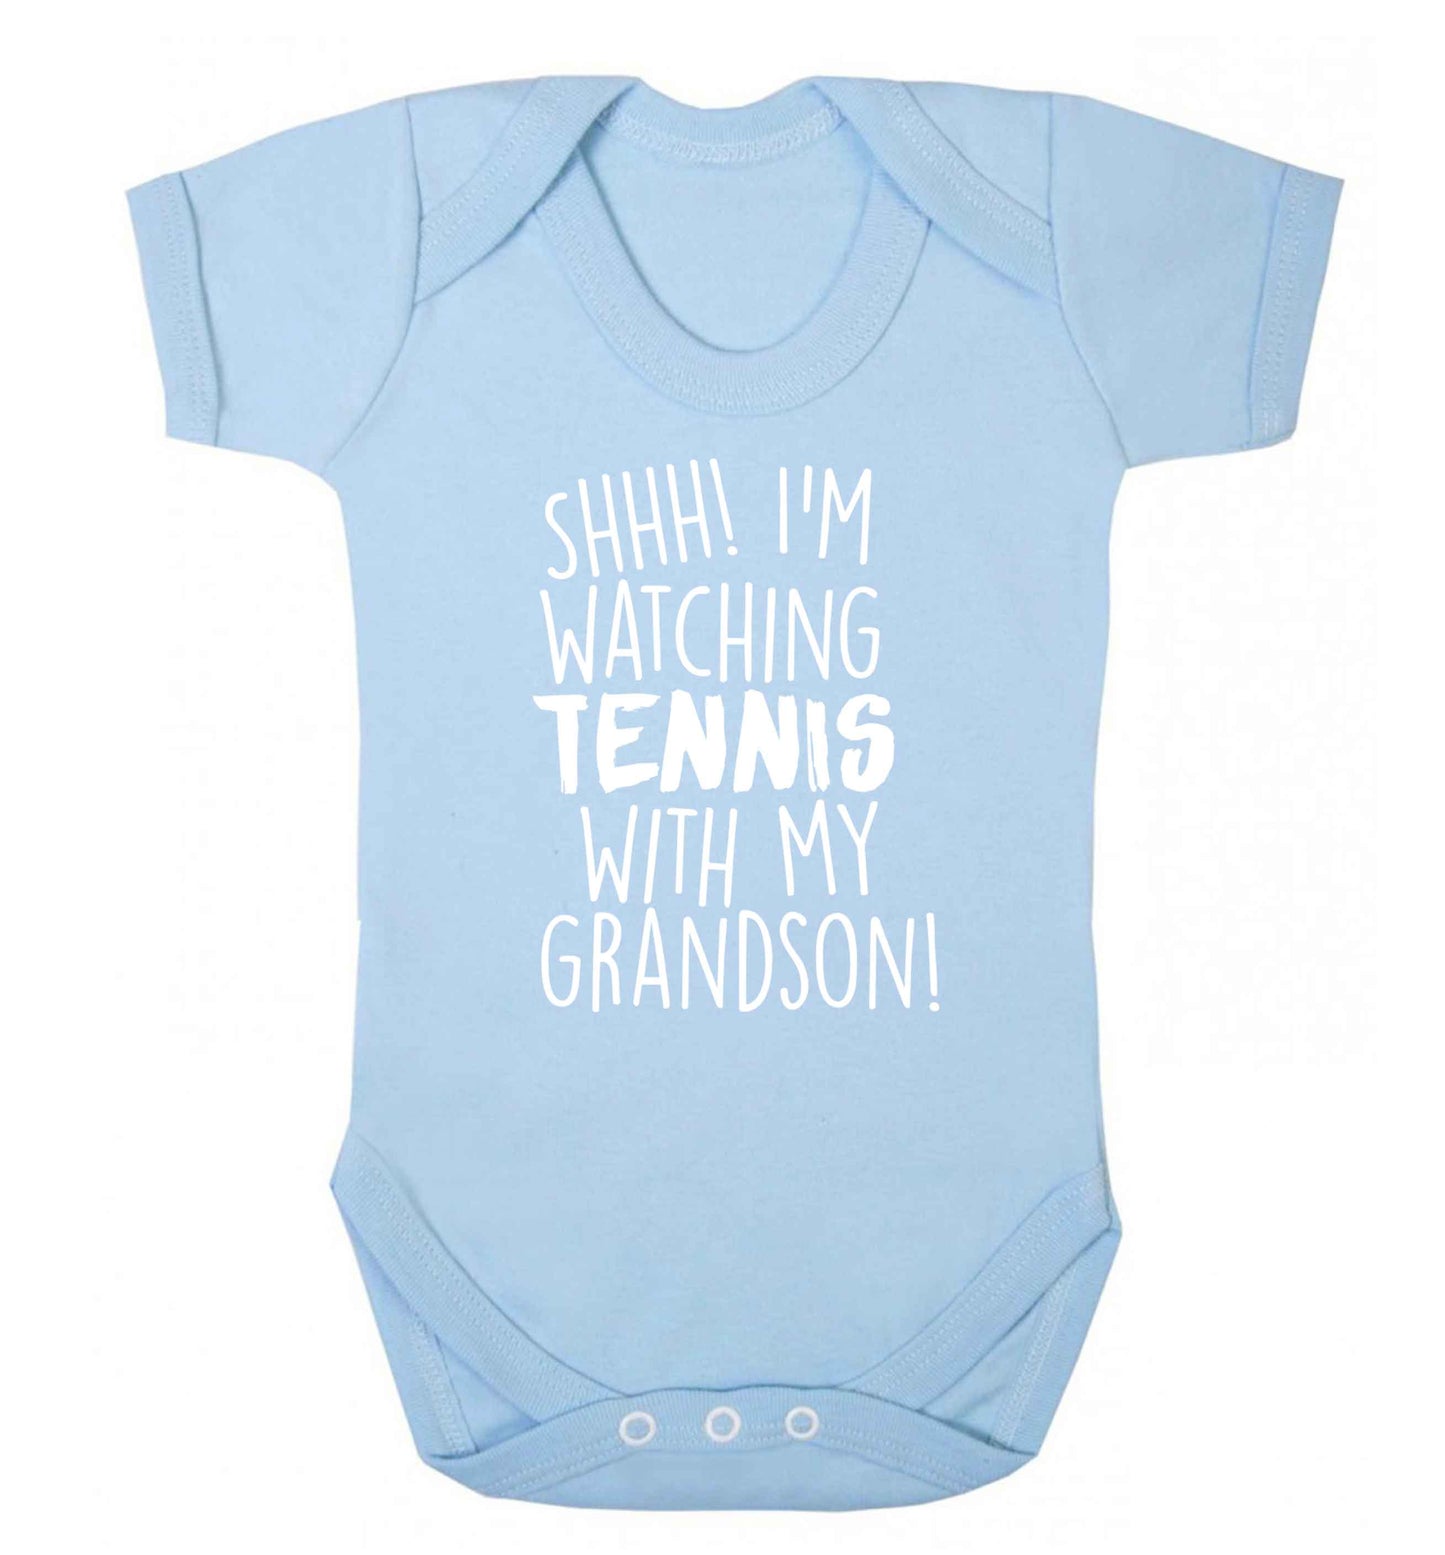 Shh! I'm watching tennis with my grandson! Baby Vest pale blue 18-24 months